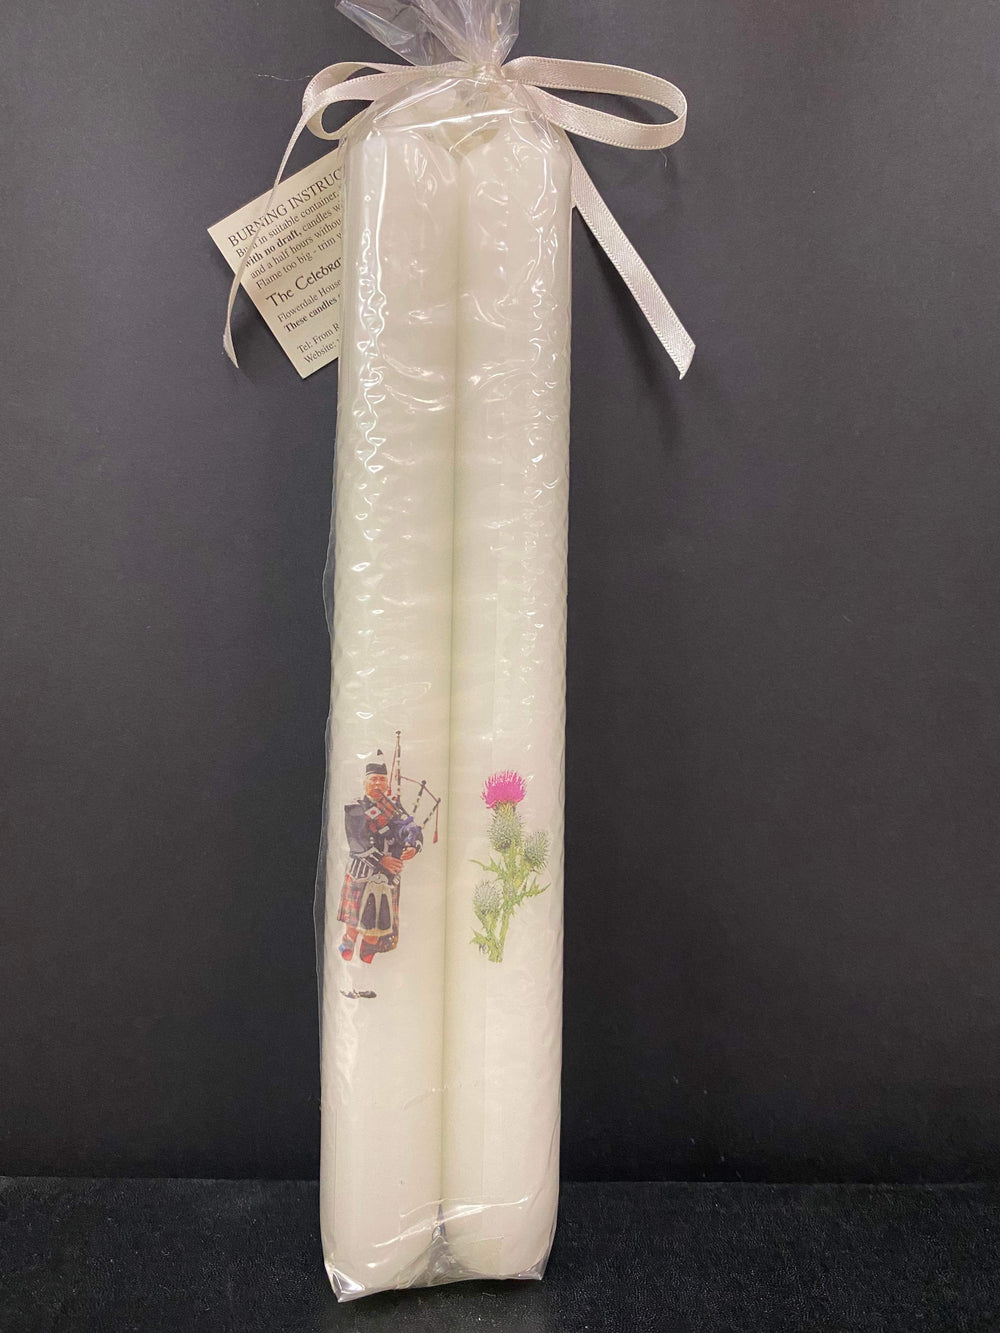 Piper and Thistle Candle Sticks (2 Pack)